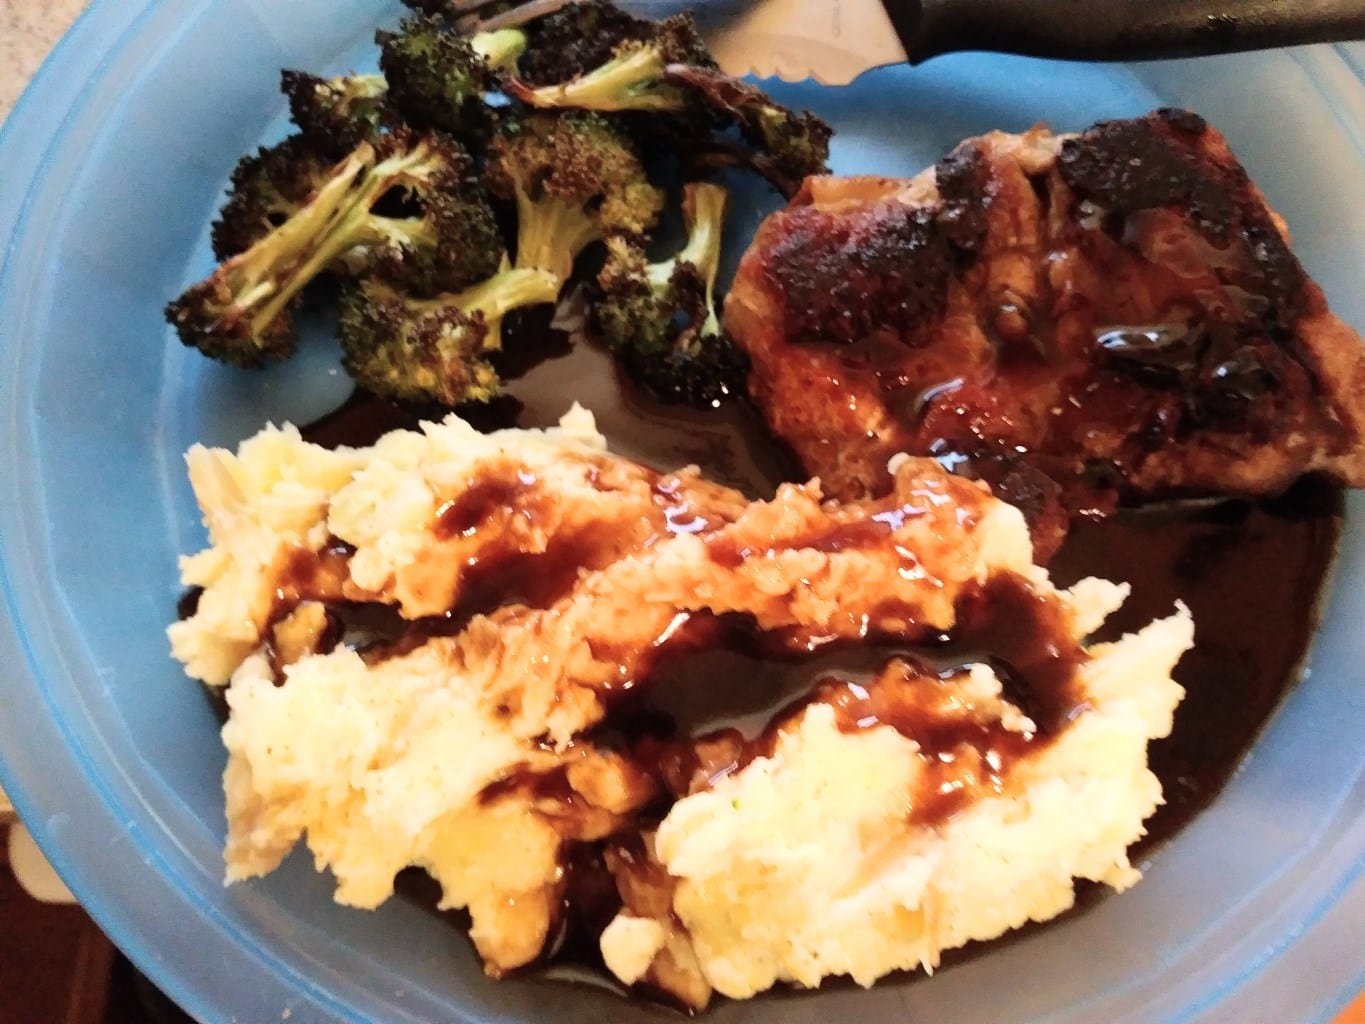 Balsamic Glazed Chicken Thighs with Mashed Garlic Potatoes and Broccoli